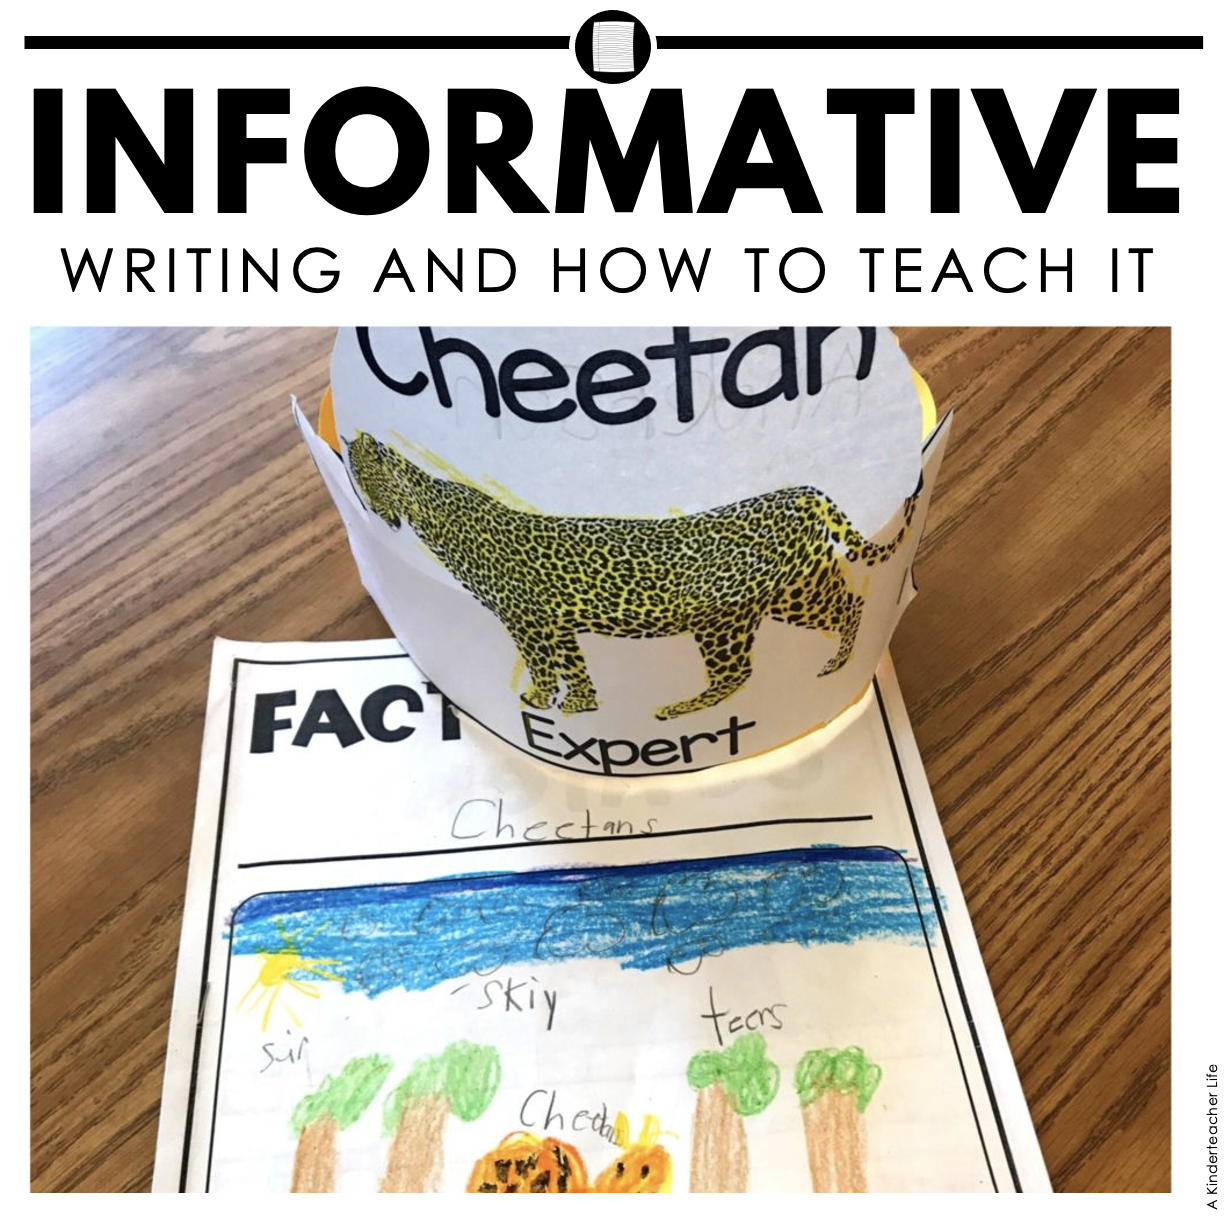 How to Teach Informative Writing